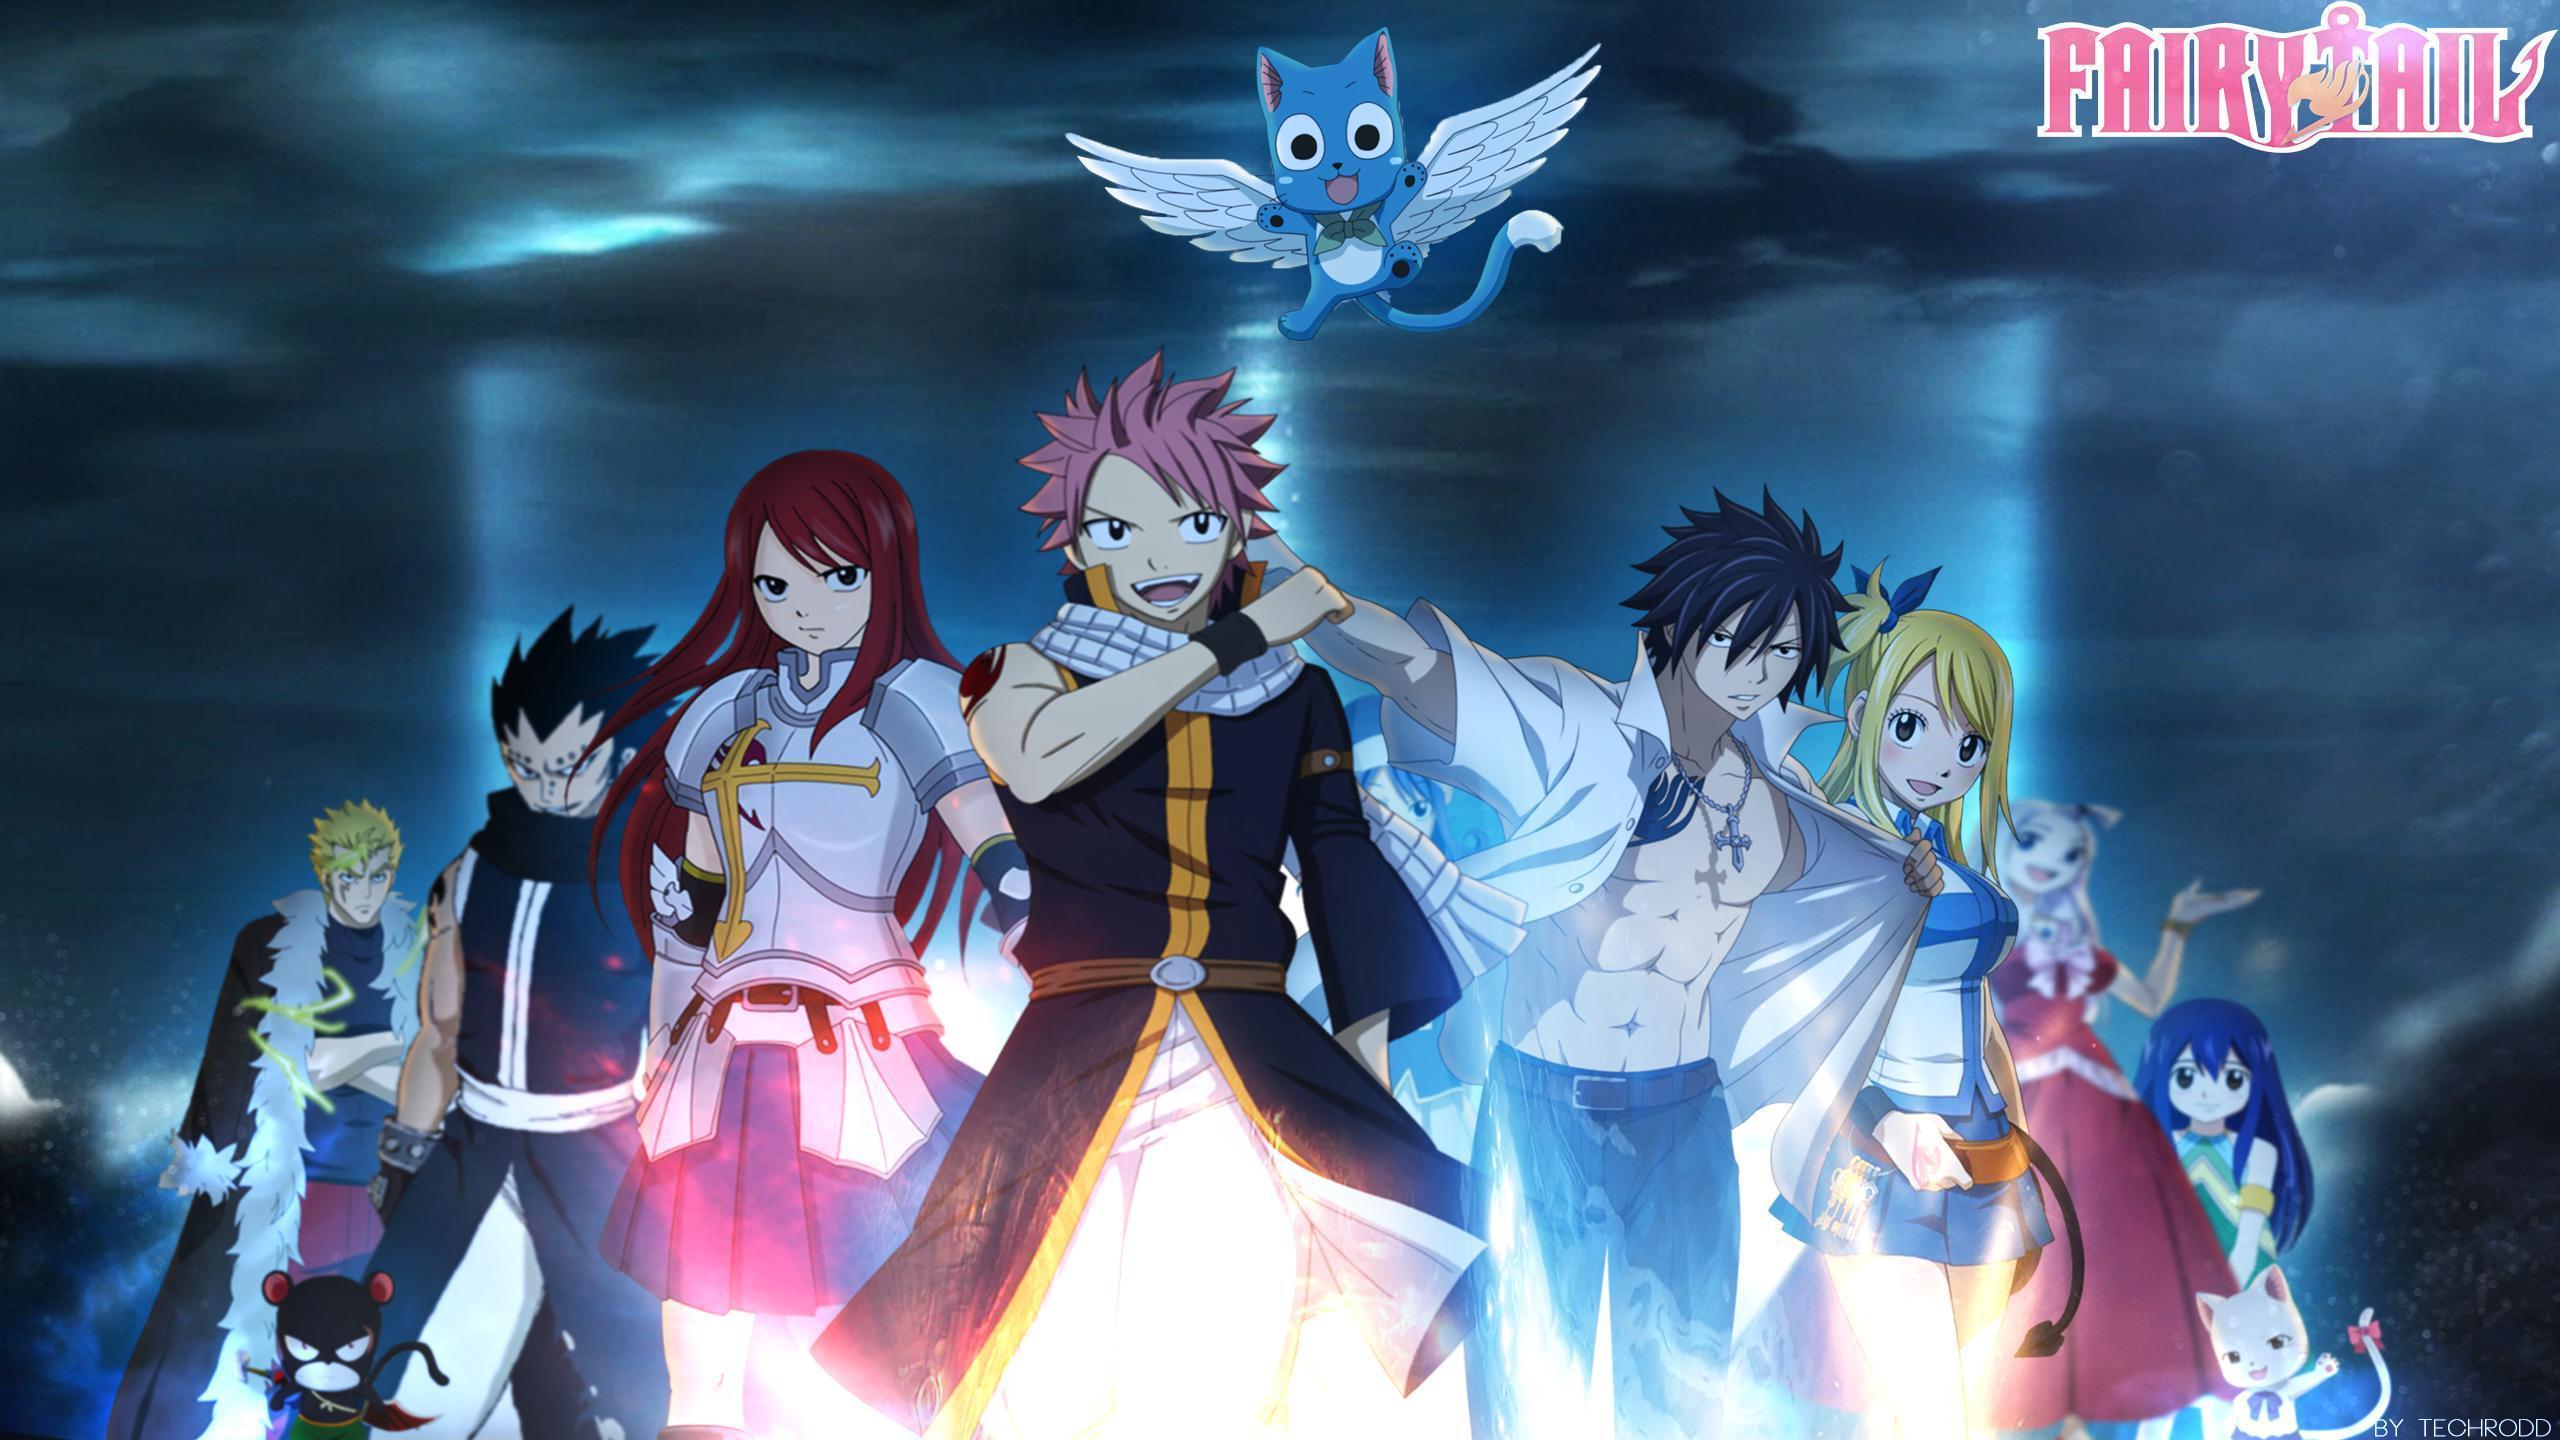 Fairy Tail Wallpapers For Free - Wallpaperforu